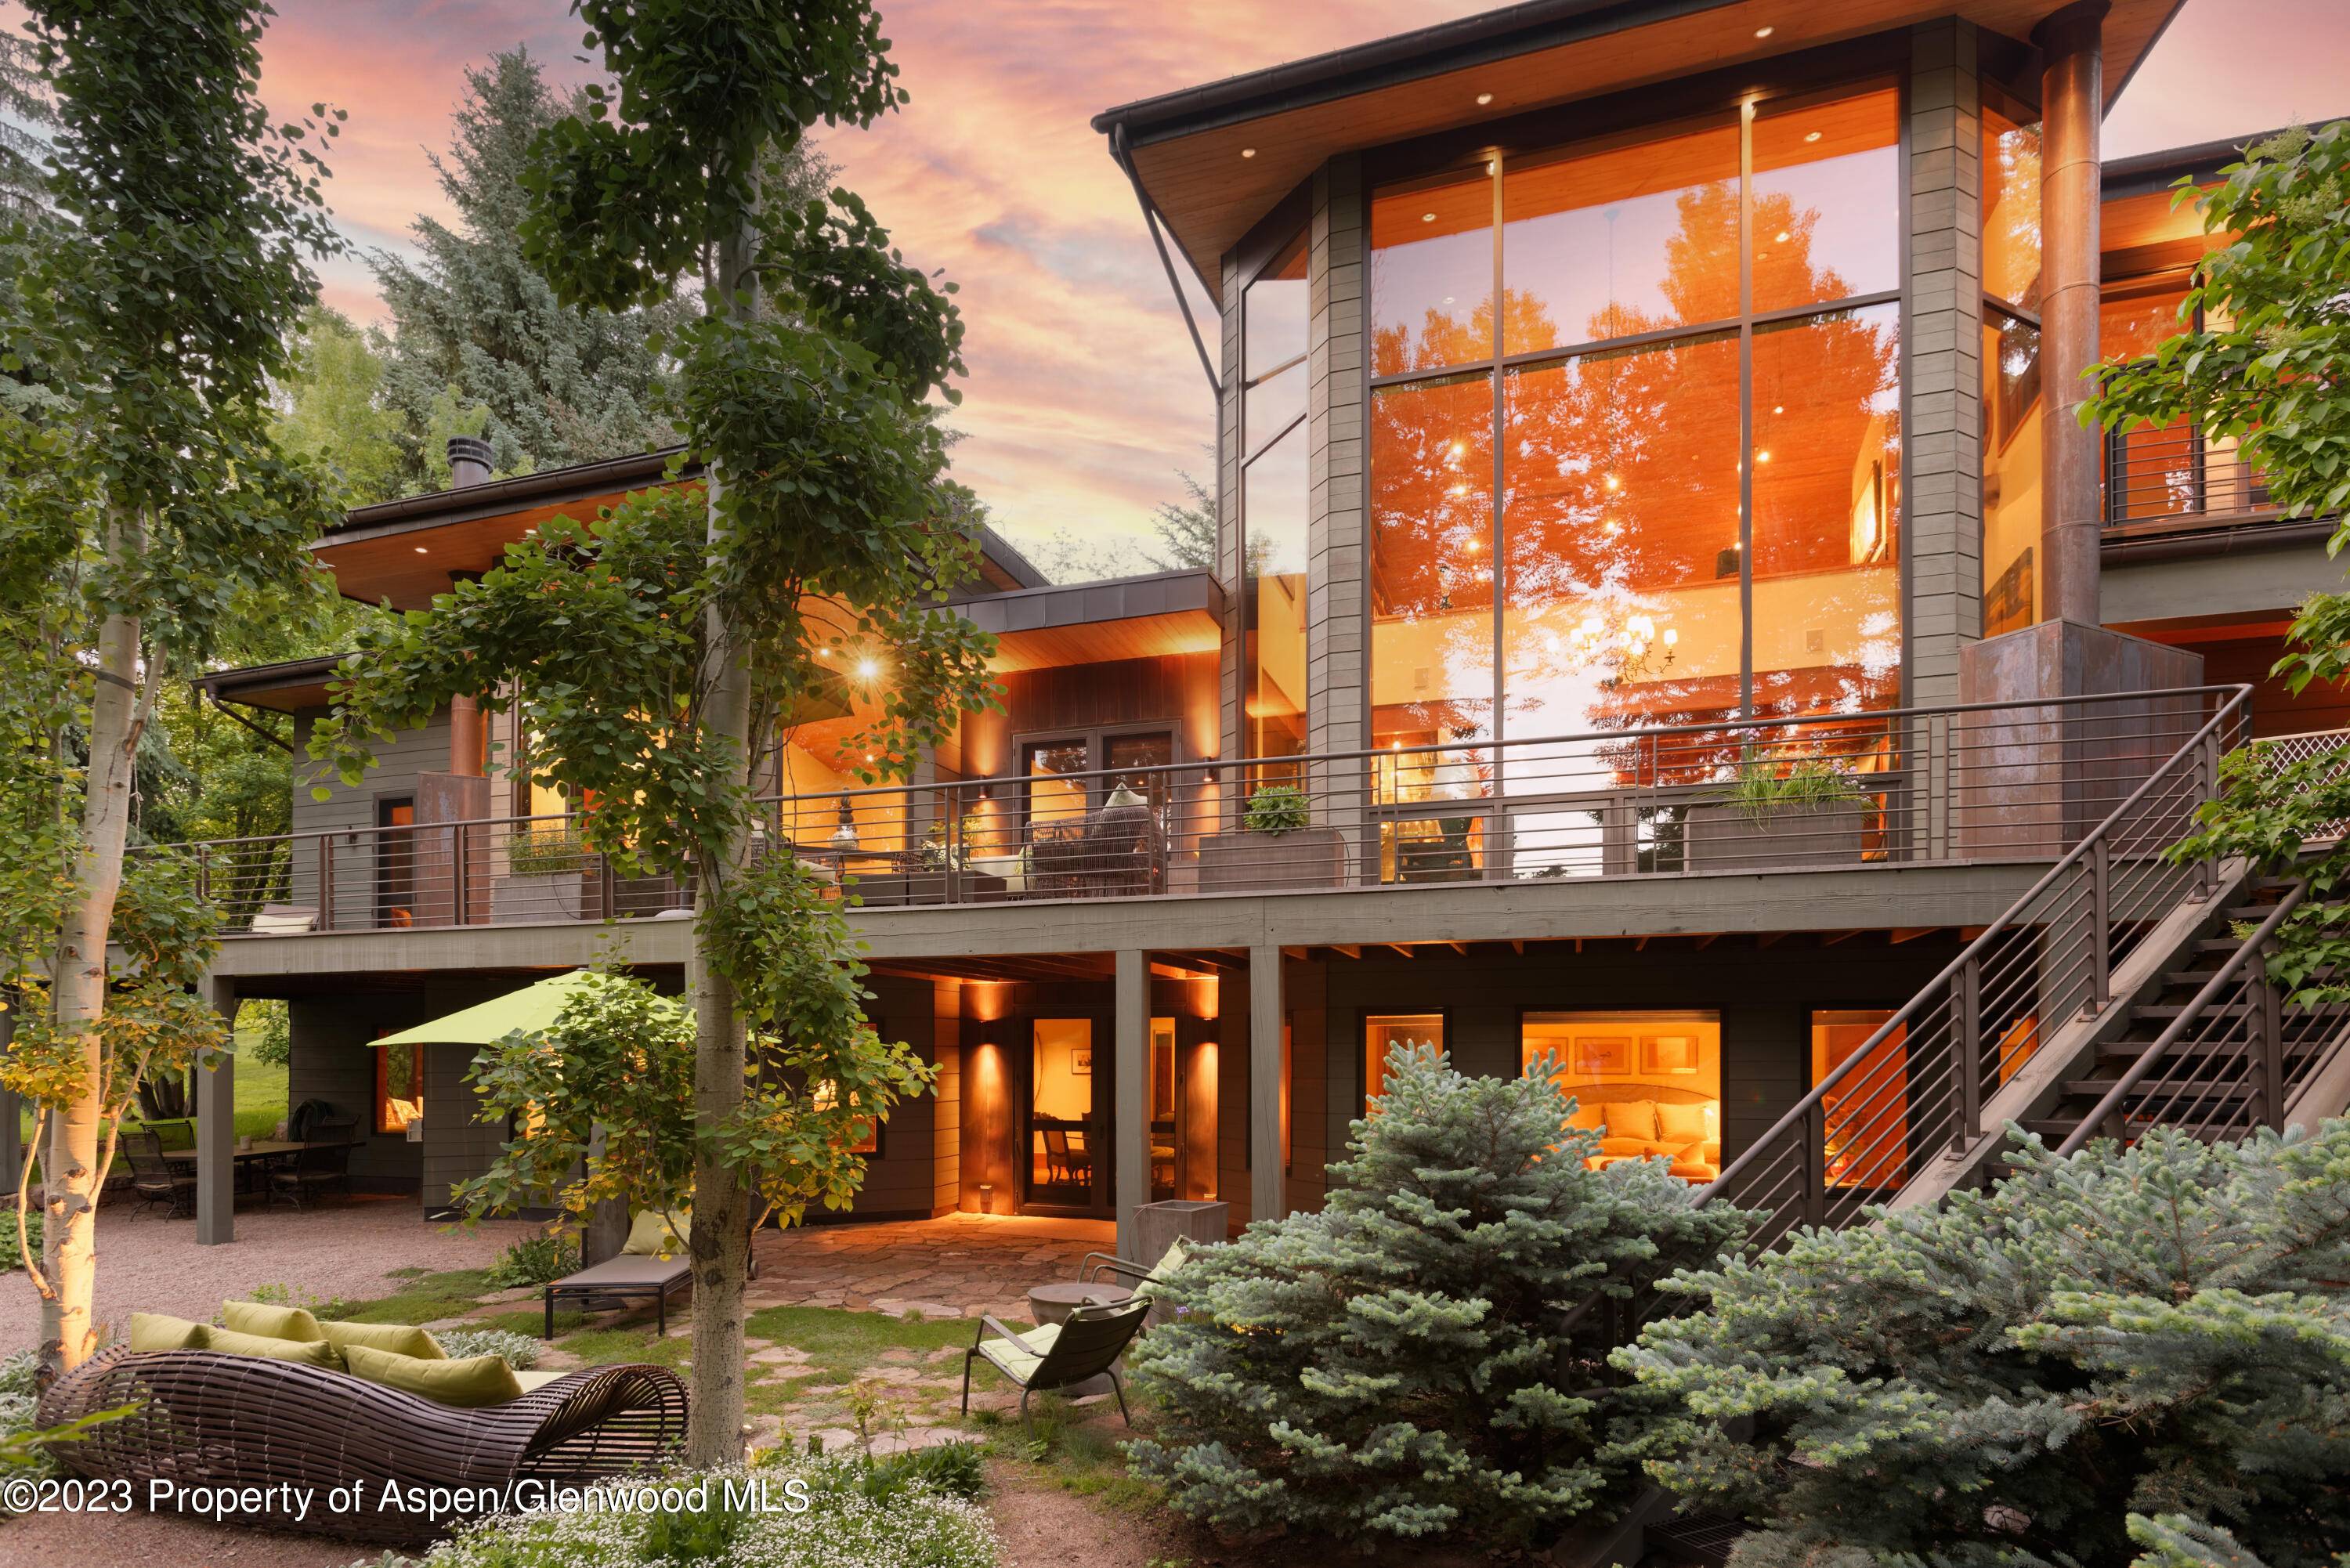 Escape to a beautiful home in serene West Aspen, offering views of Aspen Highlands.